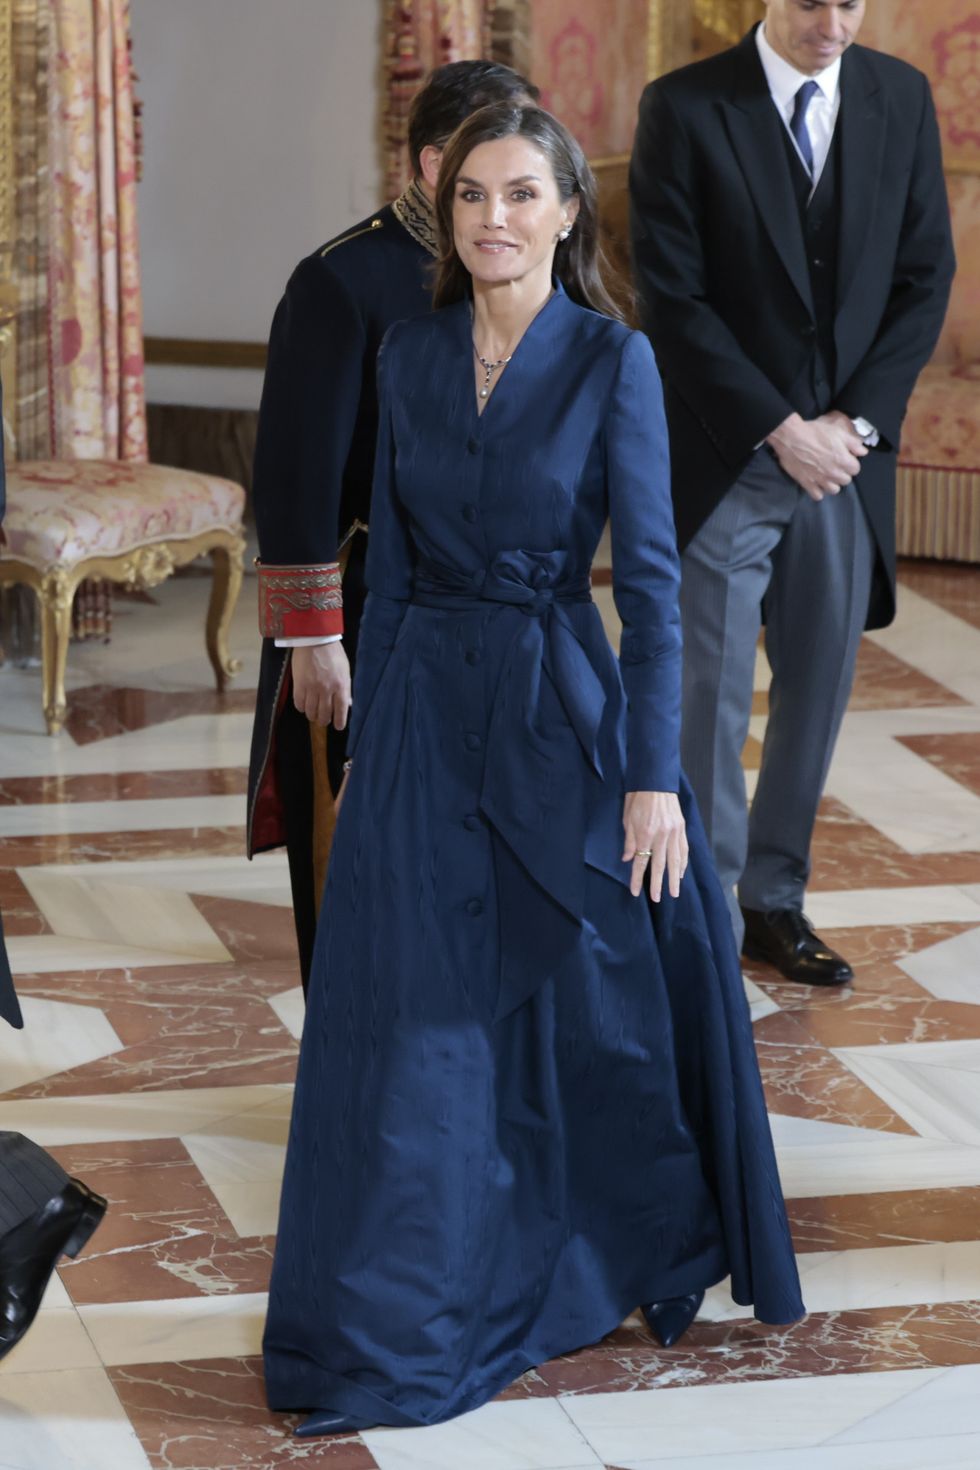 spanish queen letizia ortiz during a reception with the diplomatic corps accredited in madrid on wednesday , 31 january 2024